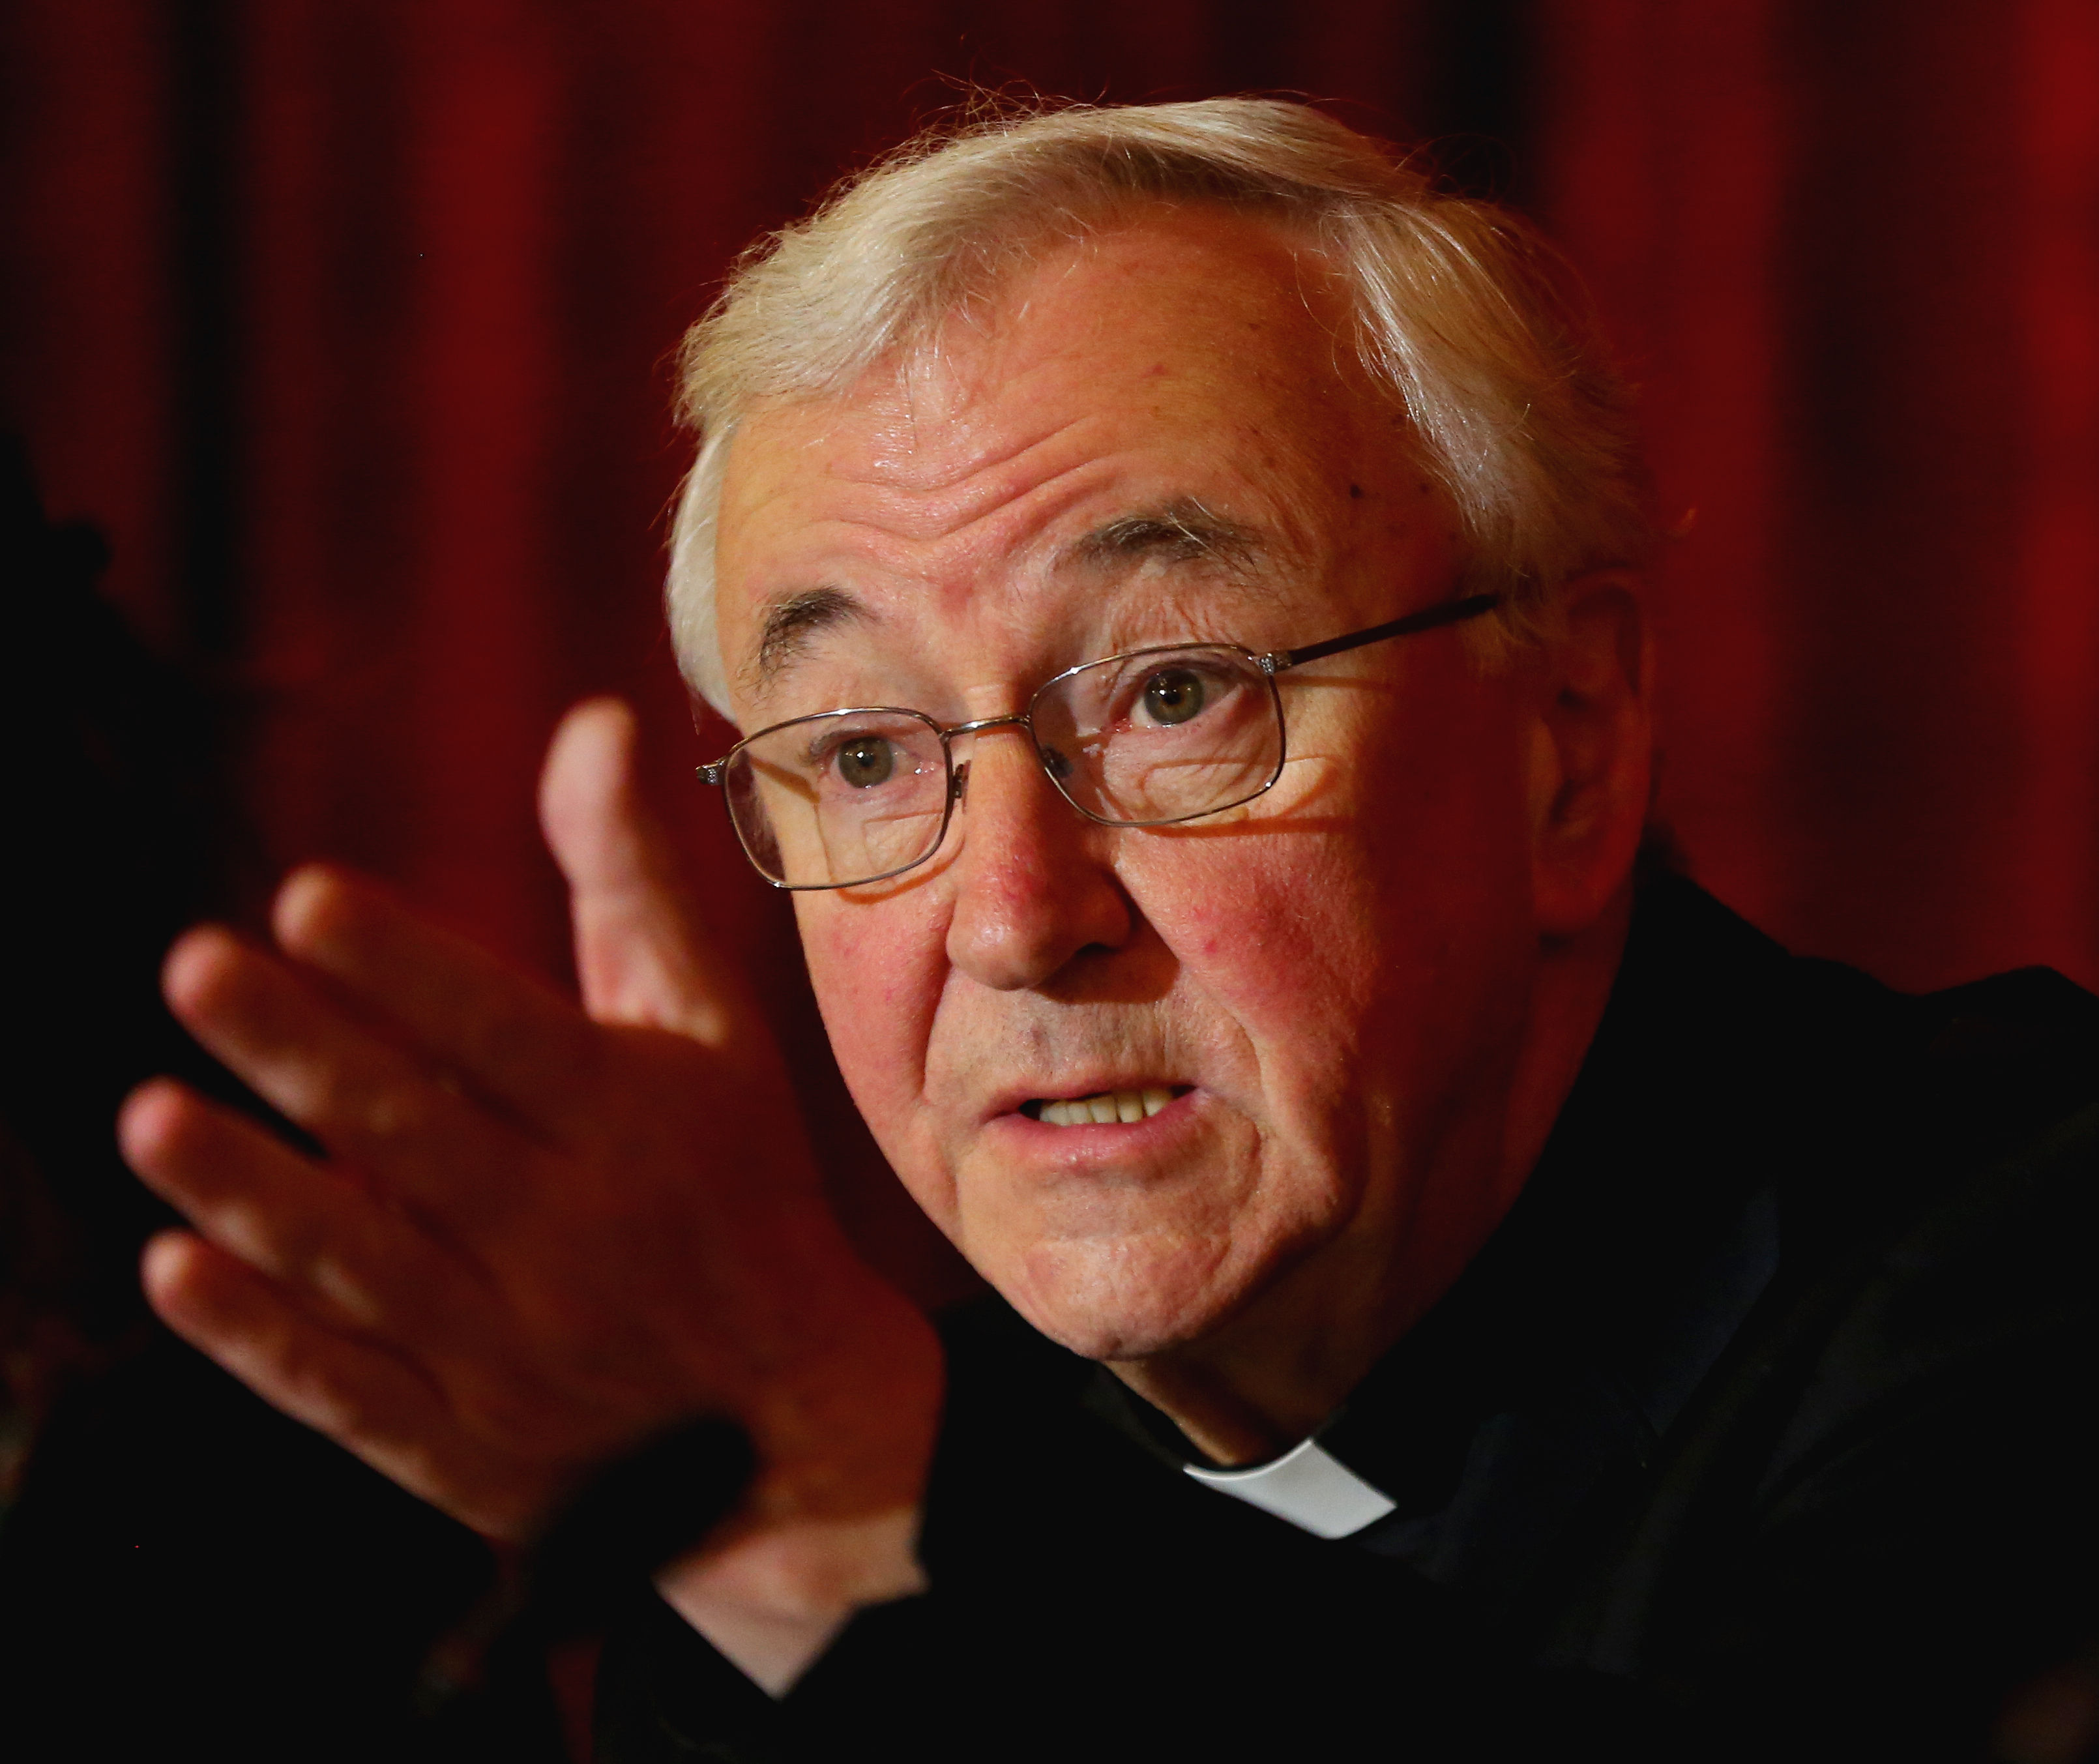 Cardinal Nichols asks Catholics to 'protest' immigration policies of fear 